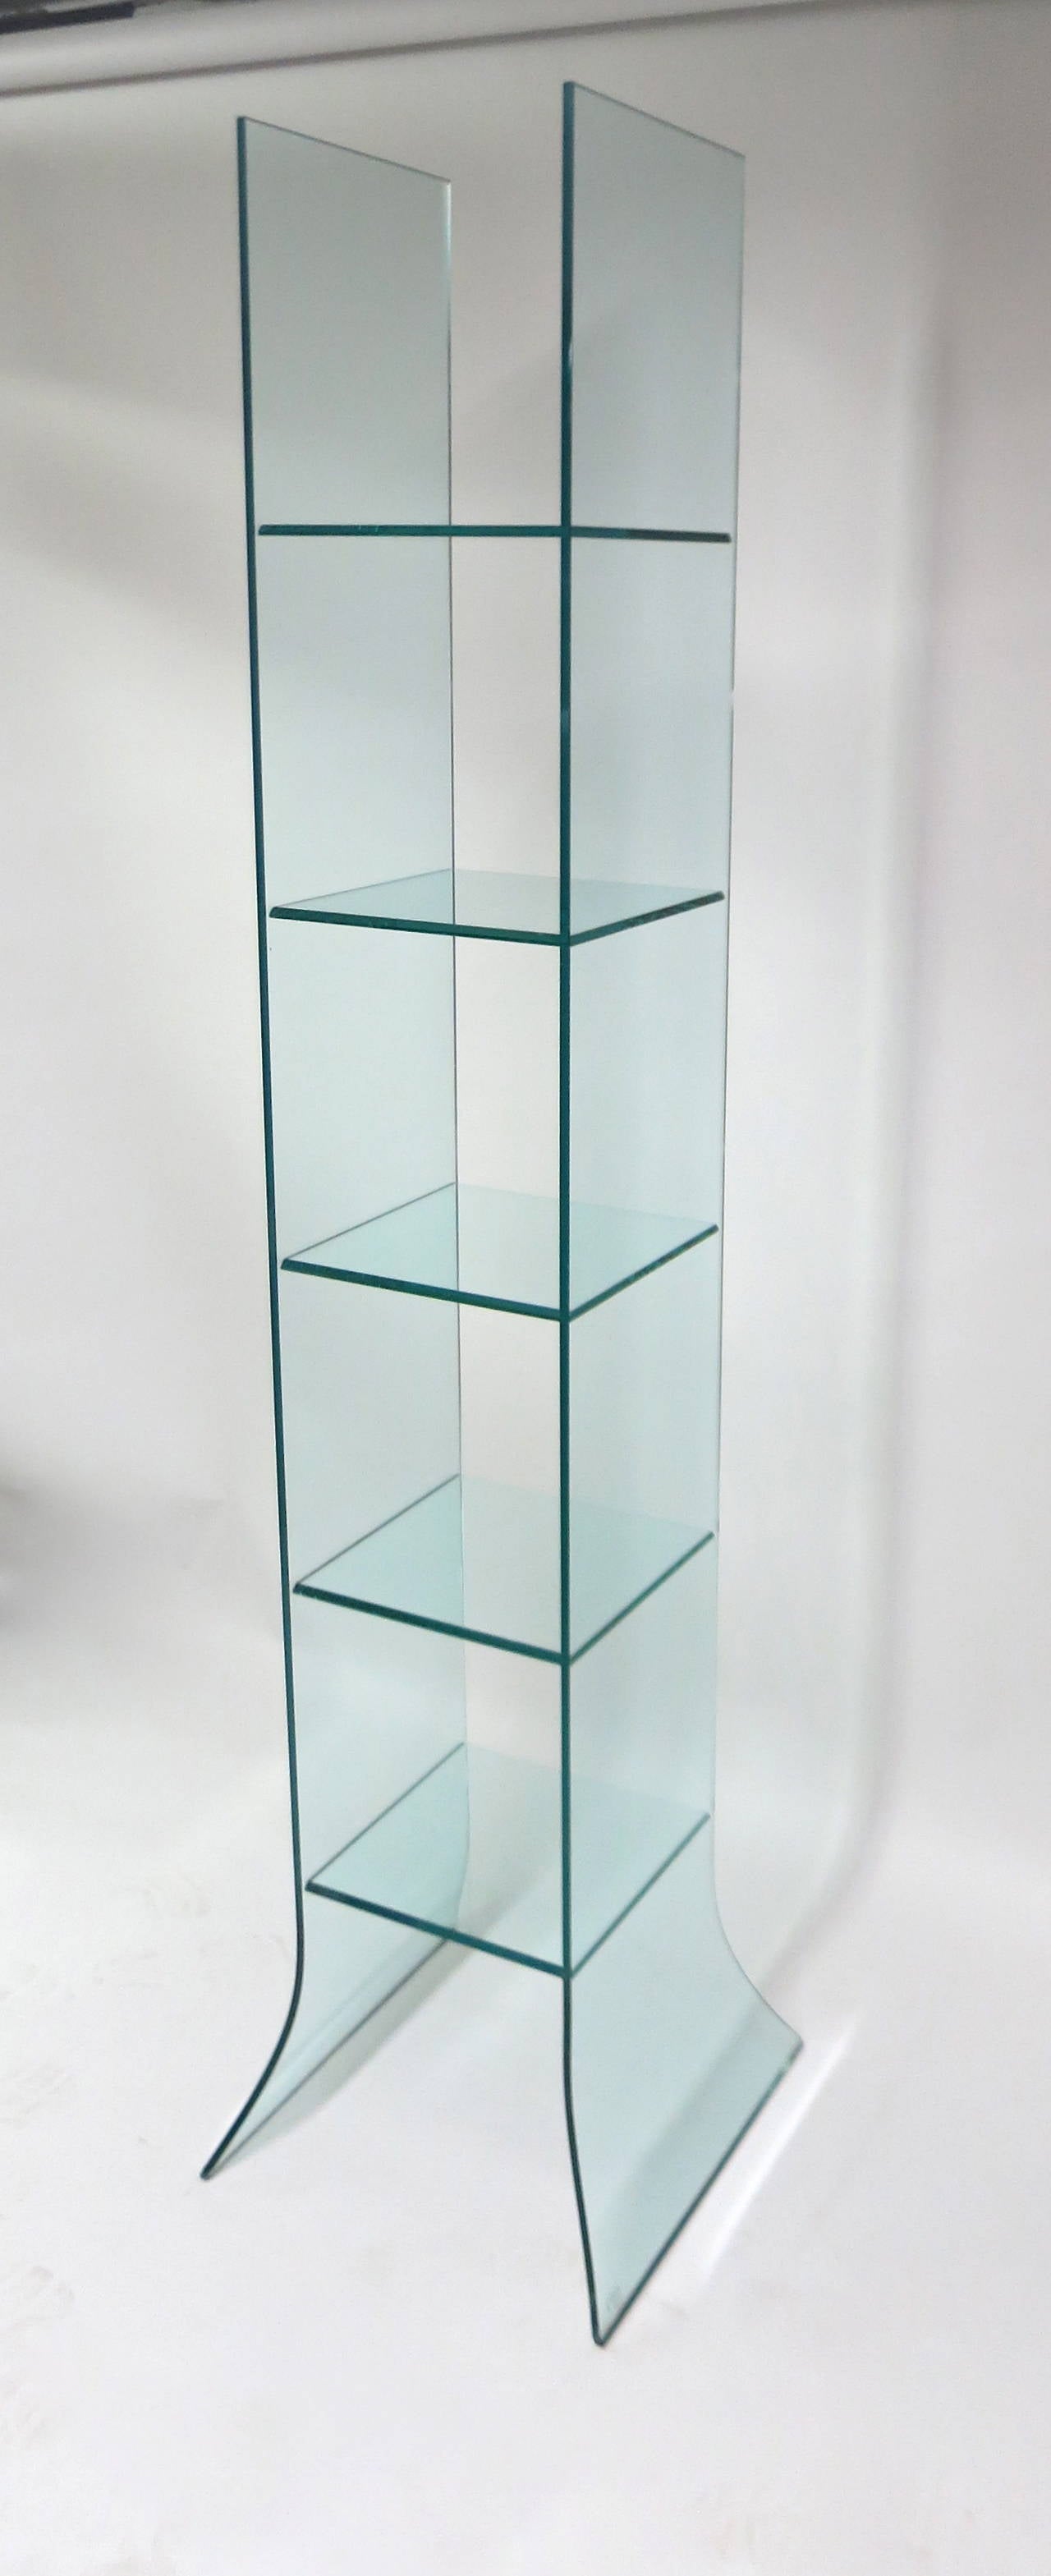 Tempered glass Shelving Unit designed in 1987 and produced by Fiam Italia. The unit has five beveled shelves that are supported on each side by the two vertical standing pieces of glass that flare at the bottom, making the unit sturdy,